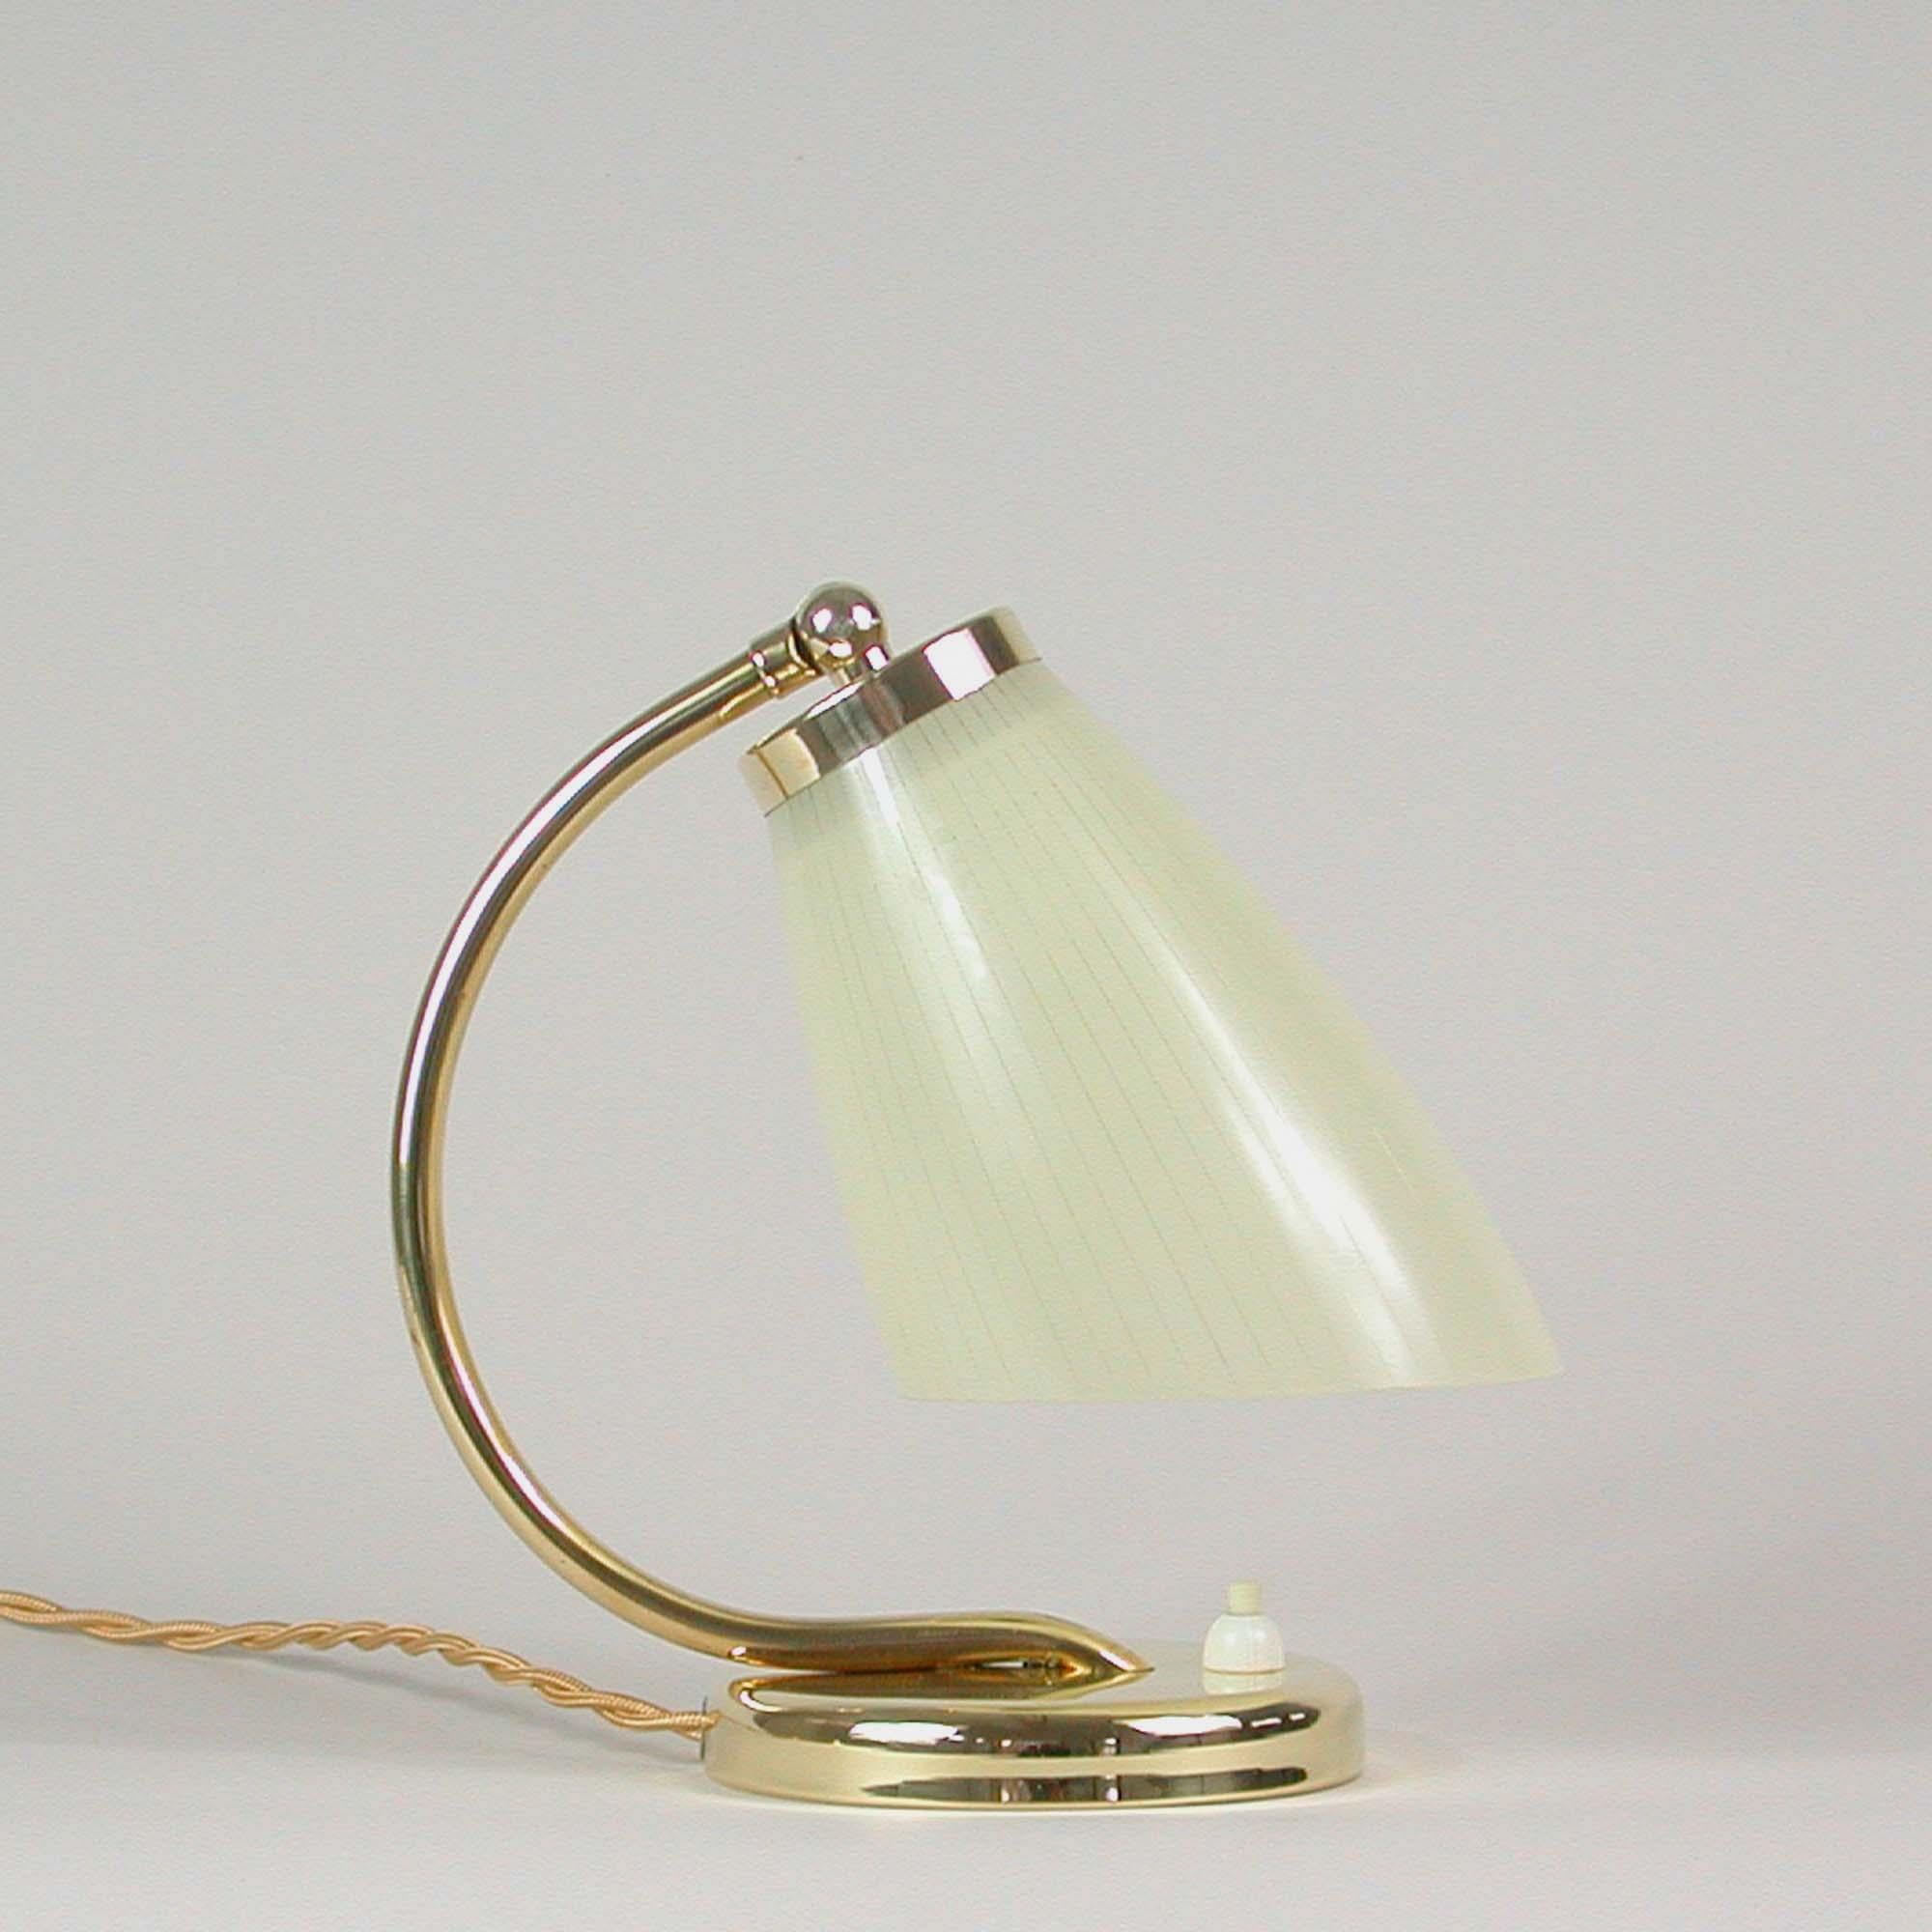 This pretty table lamp or bedside lamp was designed and manufactured in Sweden in the 1950s. It features an opaline striped cream colored lamp shade with brass base. The light has been rewired with new fabric cord and re-electrified with new E27